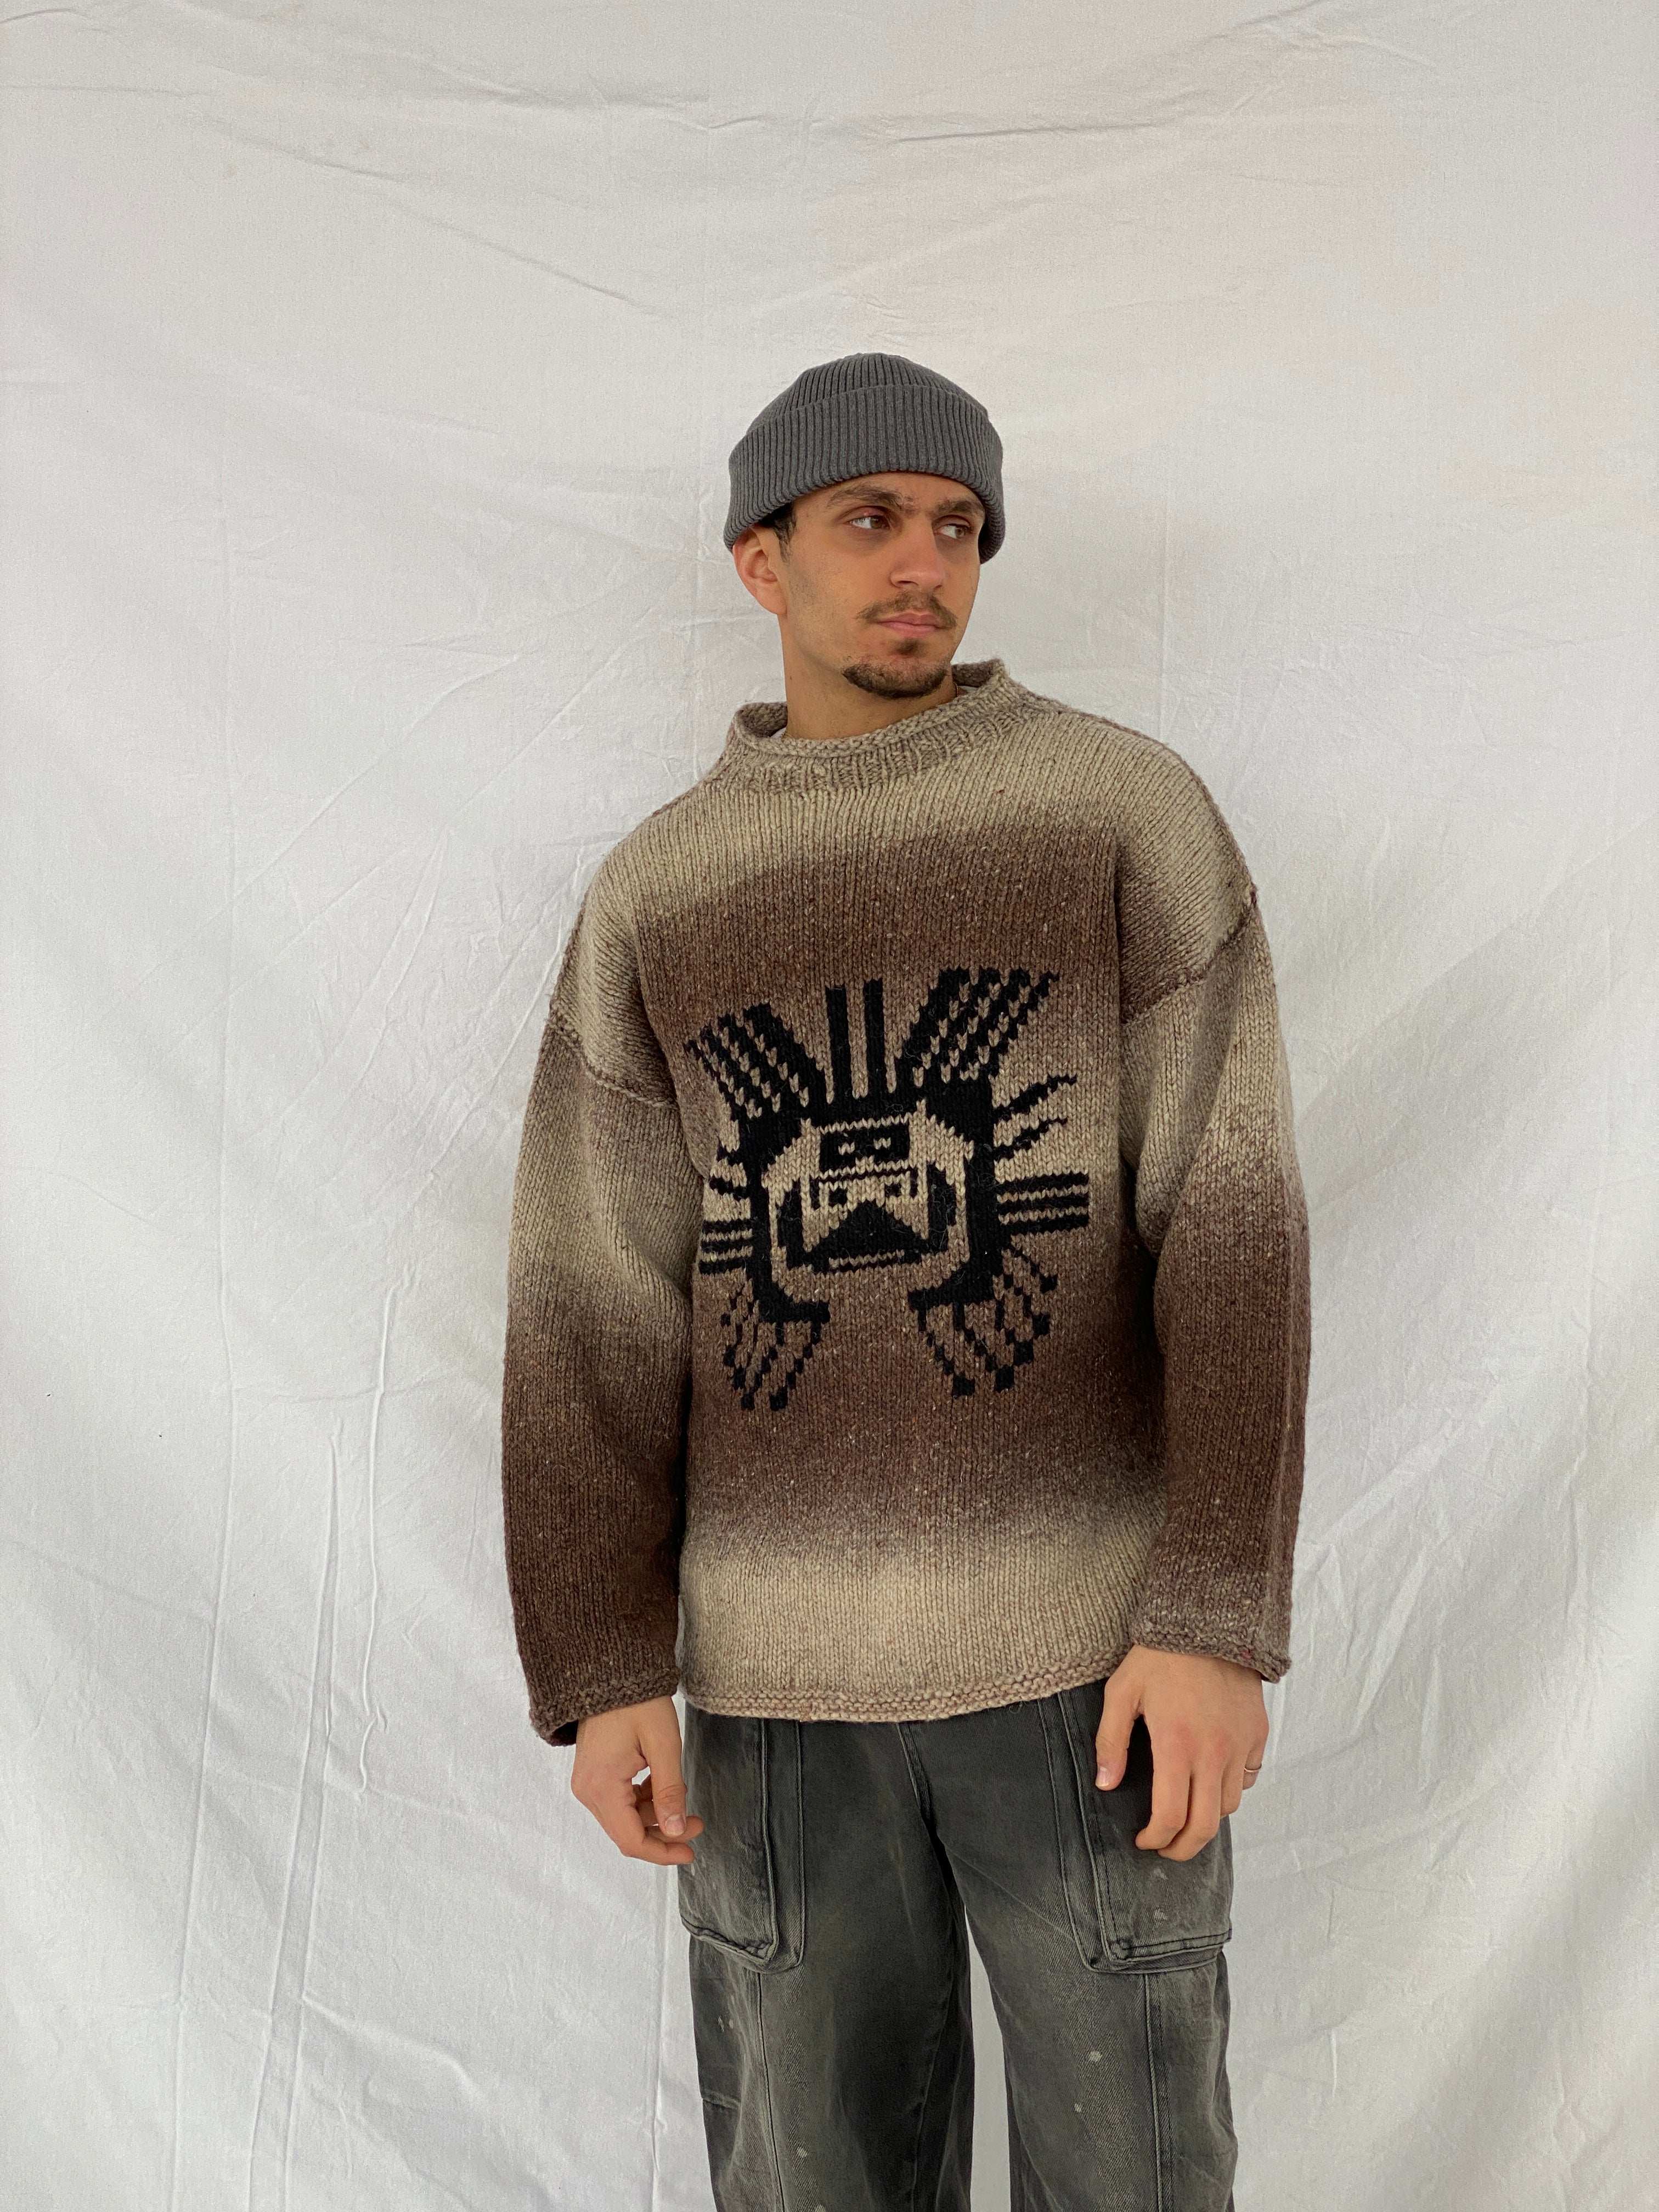 Vintage 90s Hand-Knitted Sun God Gradient Wool Jumper - Size M/L